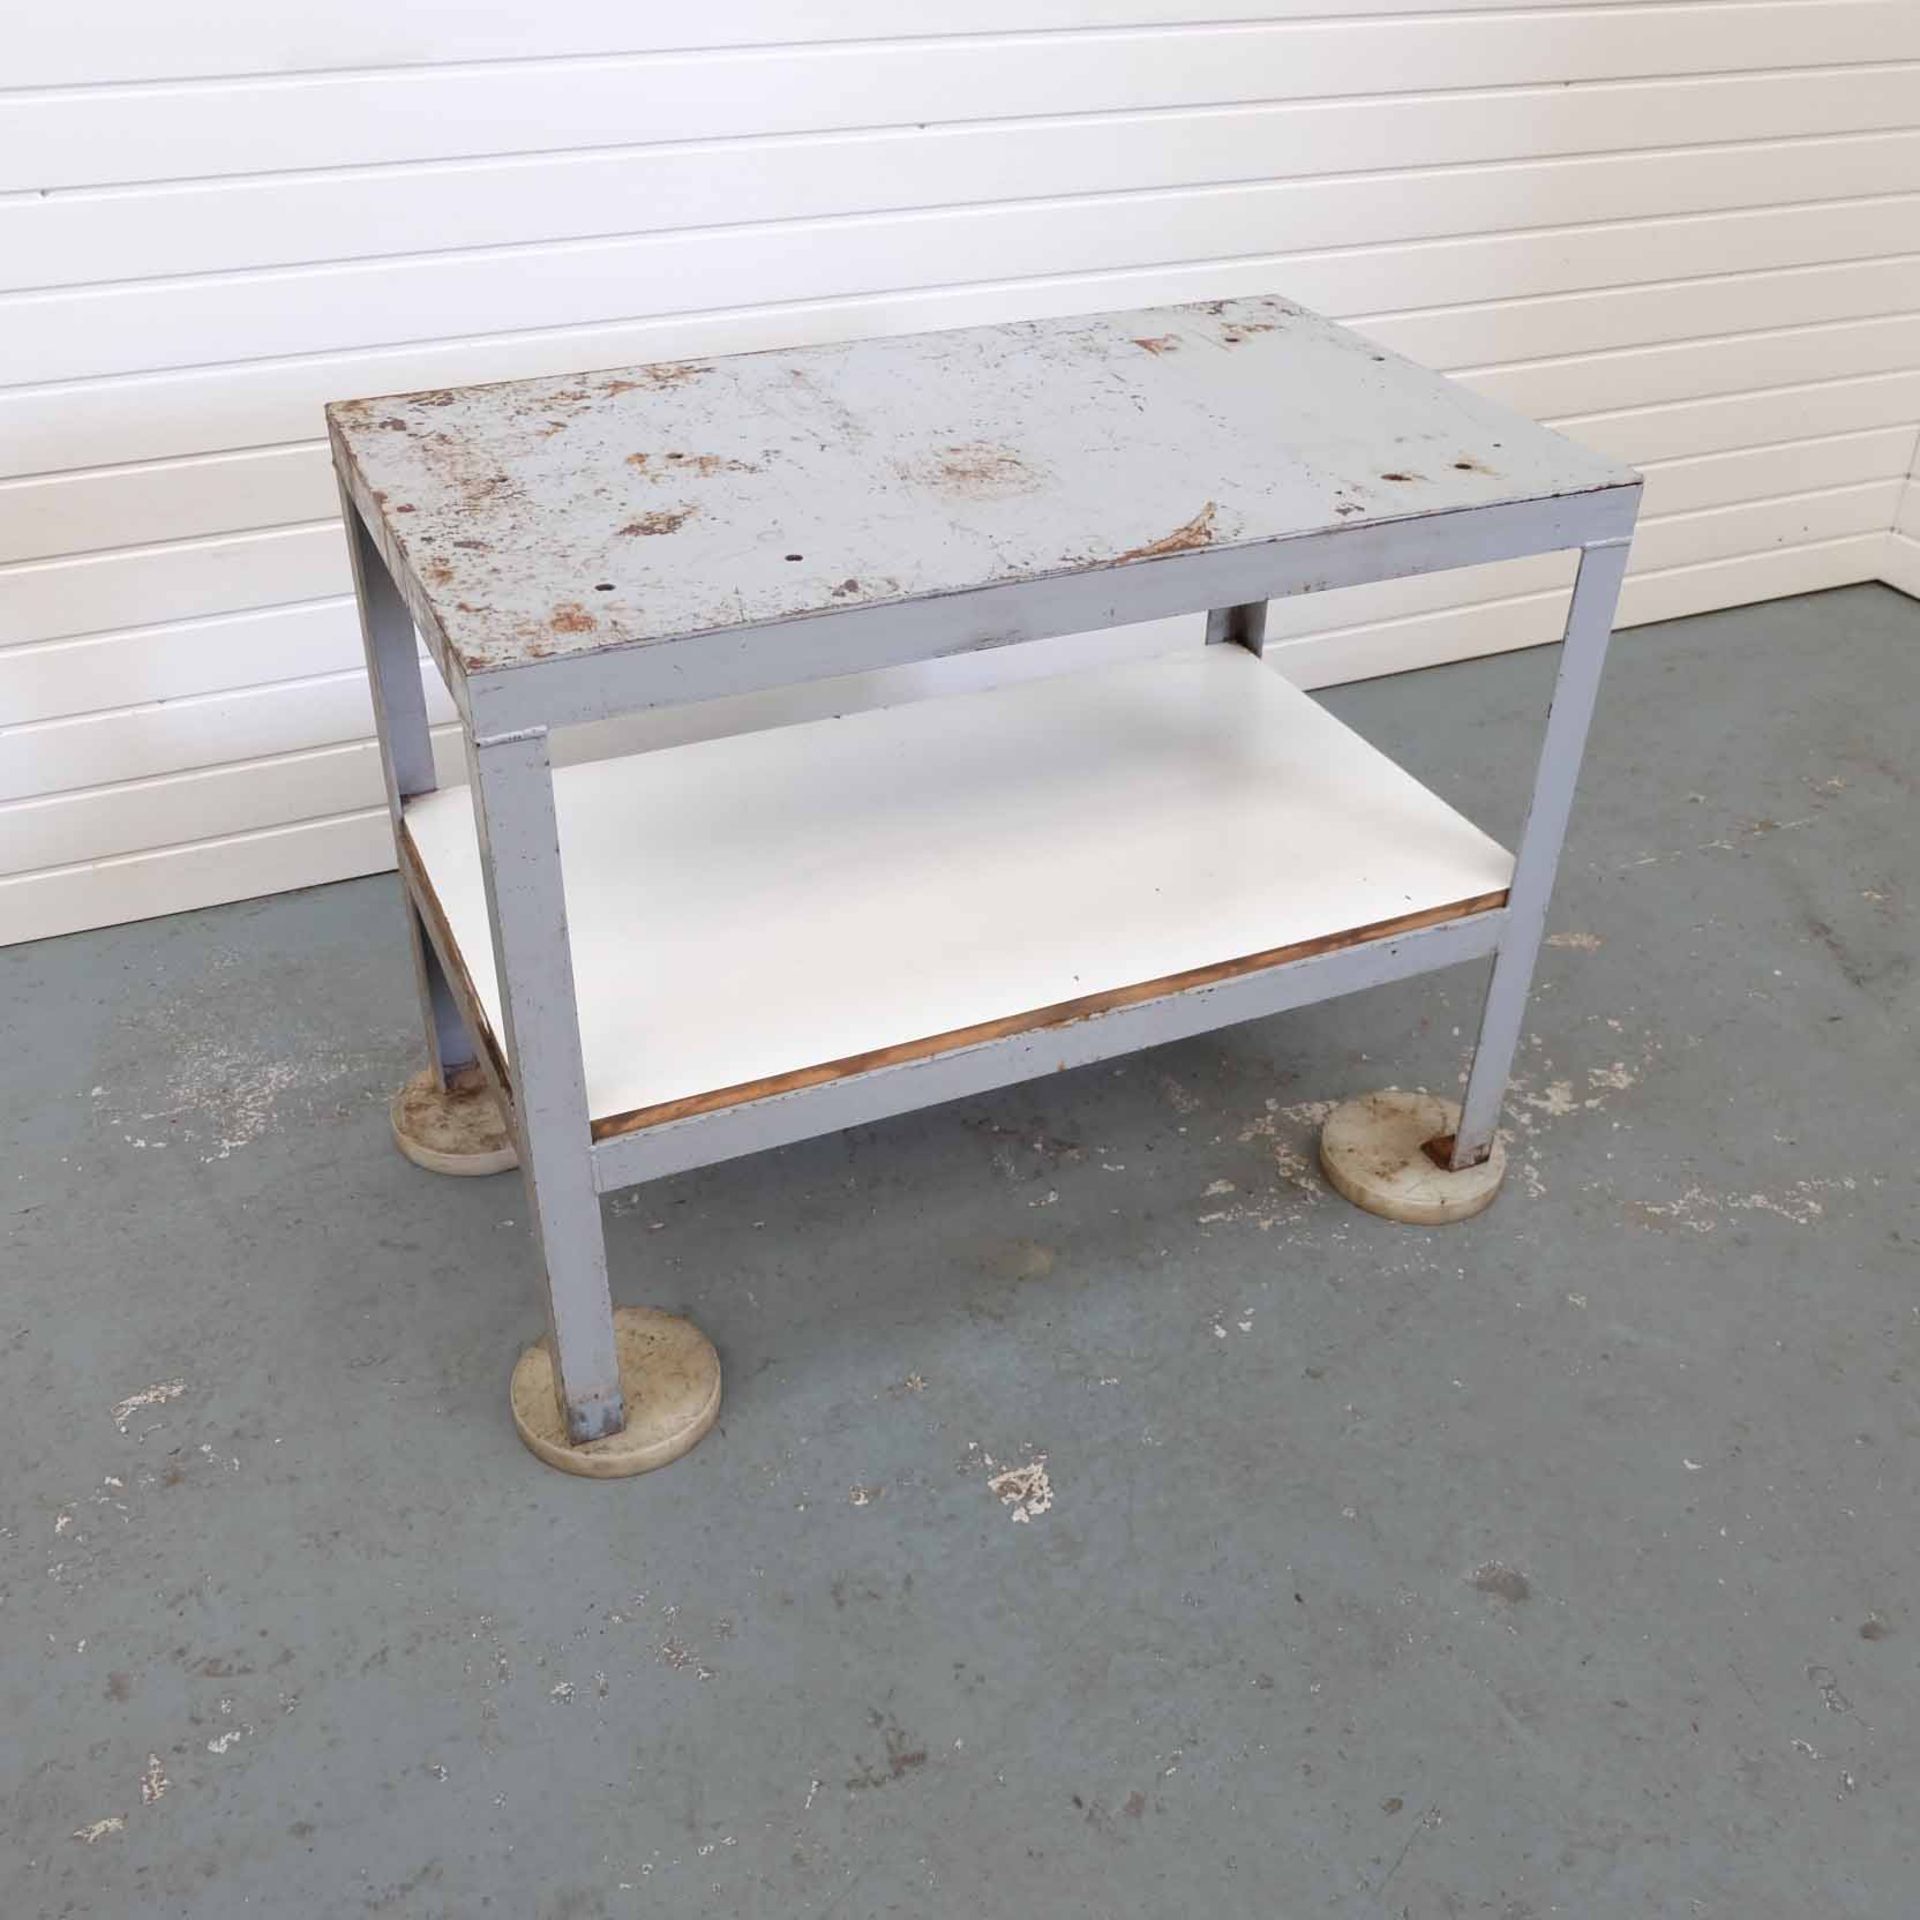 Steel Table. Size 1000mm x 590mm x 755mm High. - Image 2 of 3